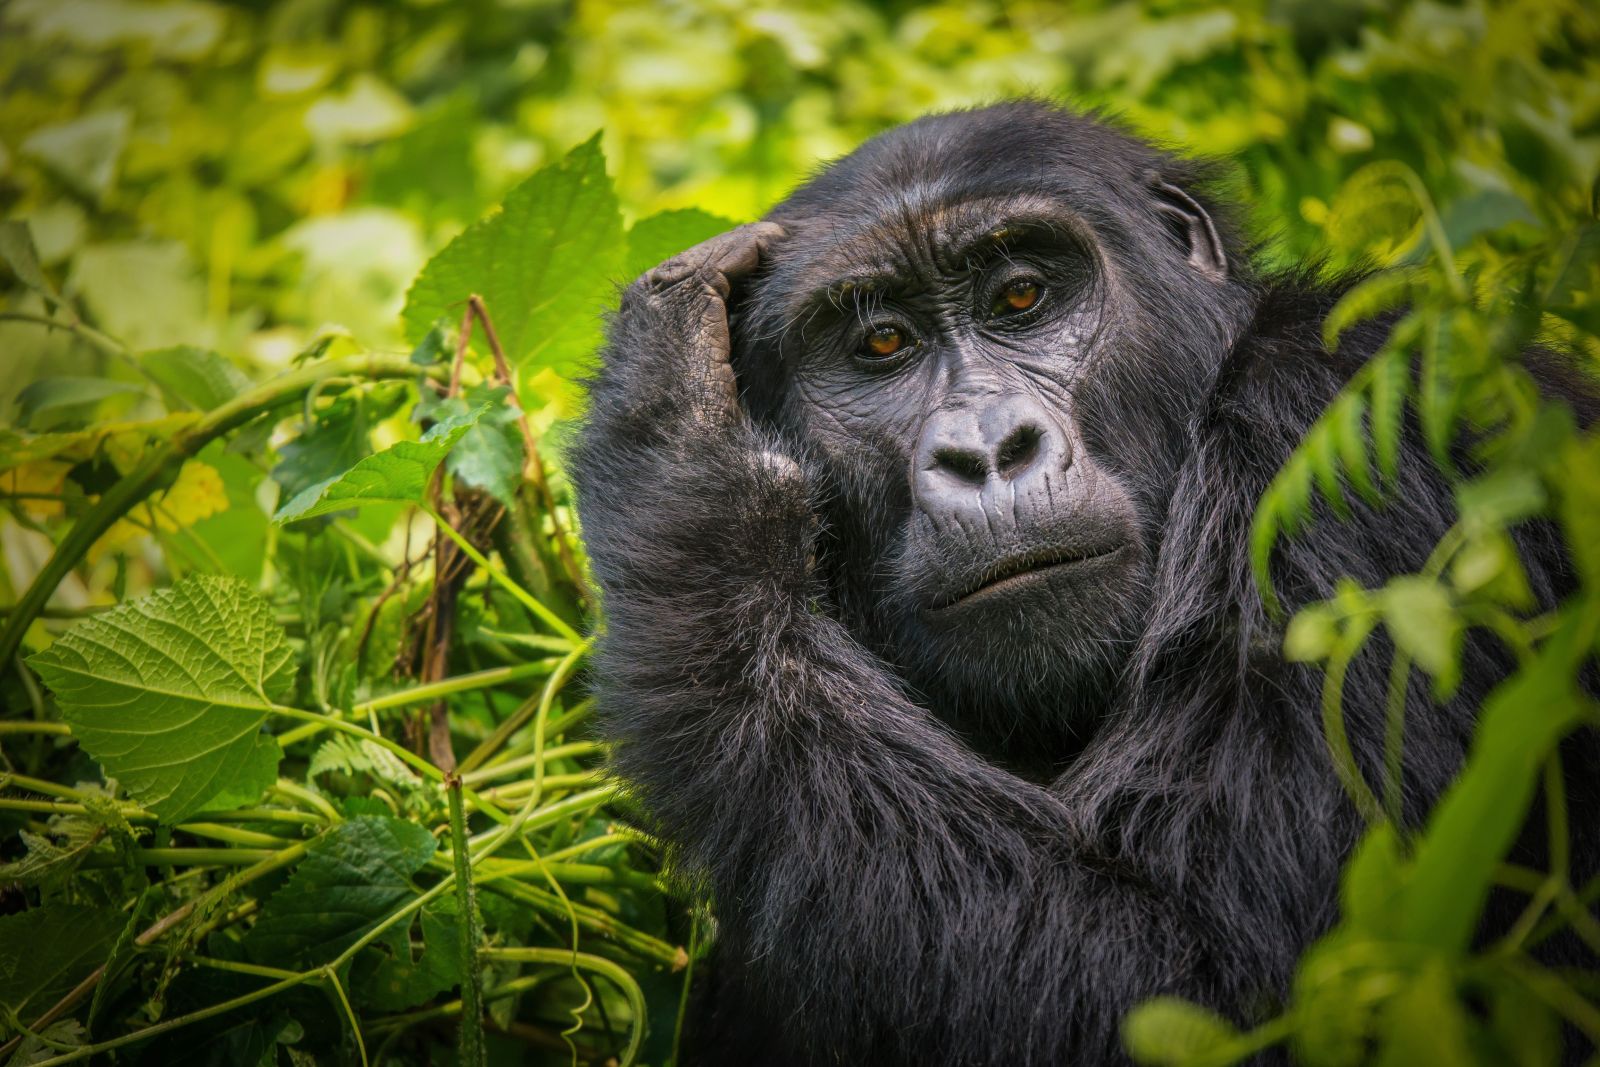 A female mountain gorilla in the forests of Uganda